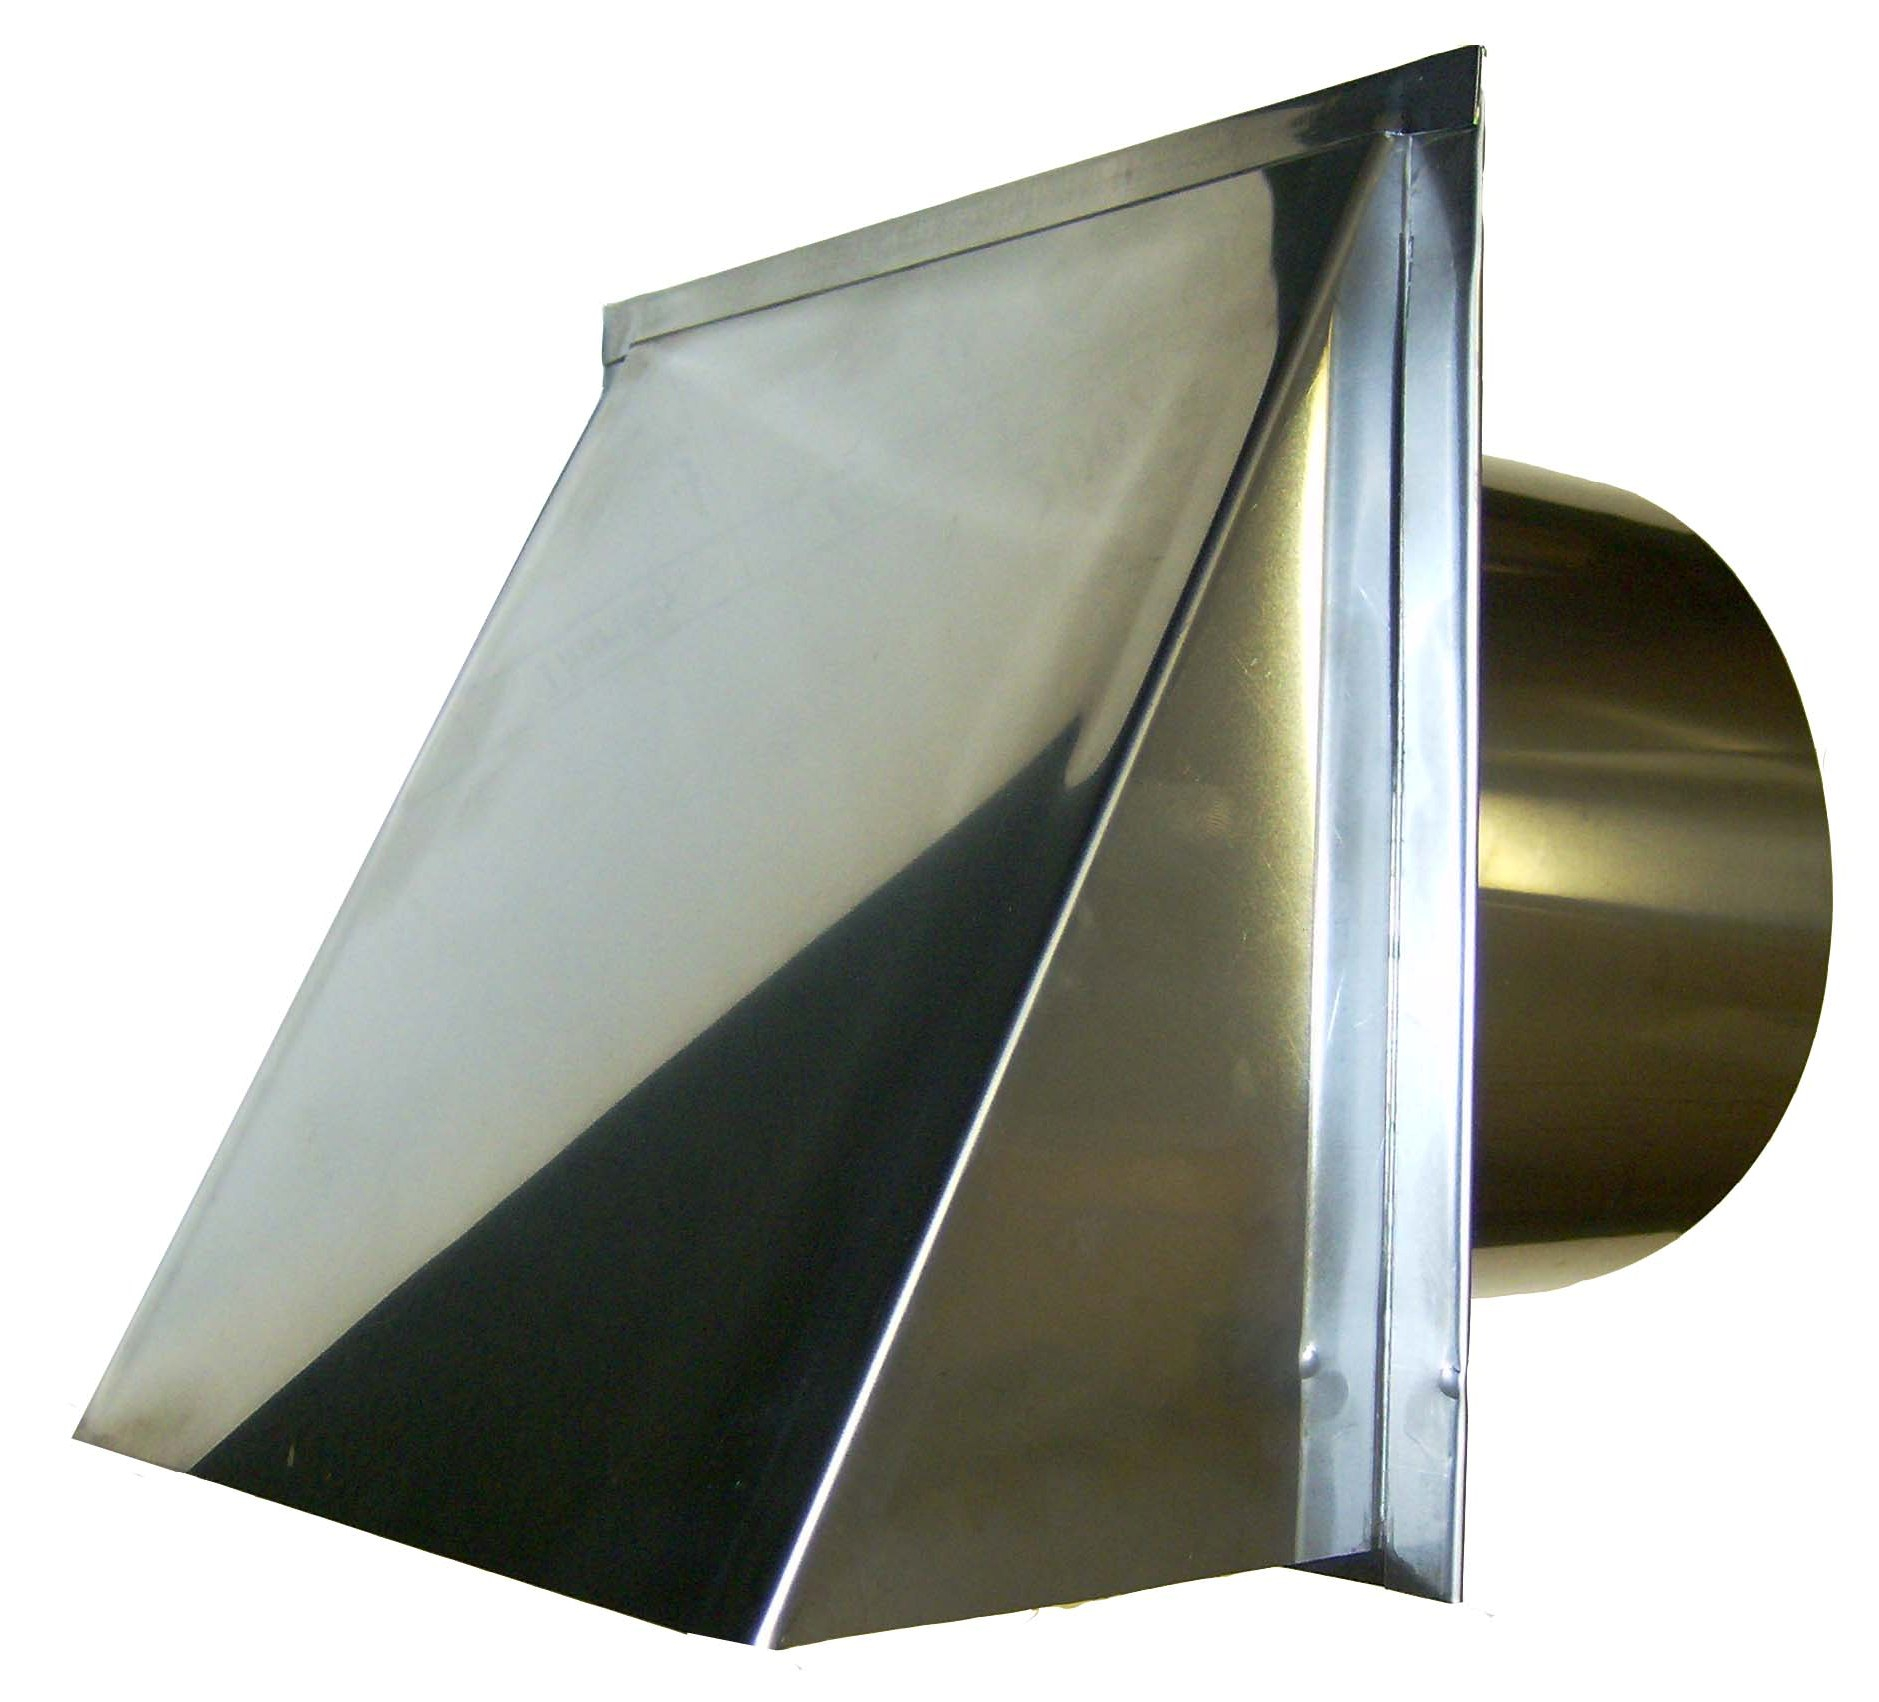 Range Exhaust Wall Vents And Roof Vents From Luxury Metals pertaining to size 1879 X 1702